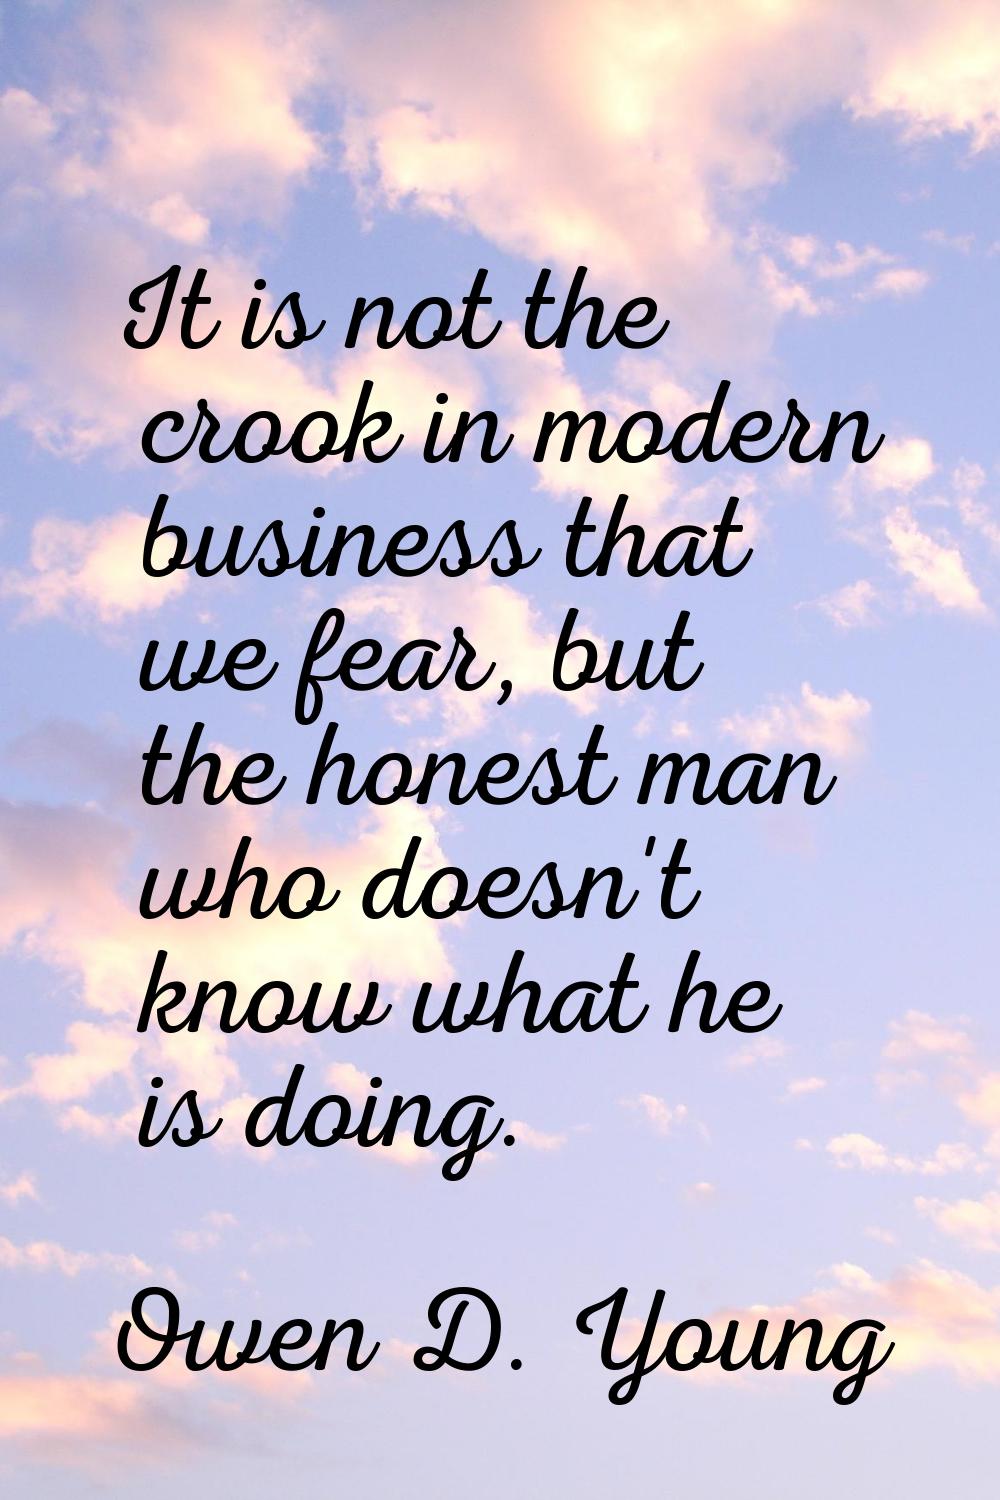 It is not the crook in modern business that we fear, but the honest man who doesn't know what he is